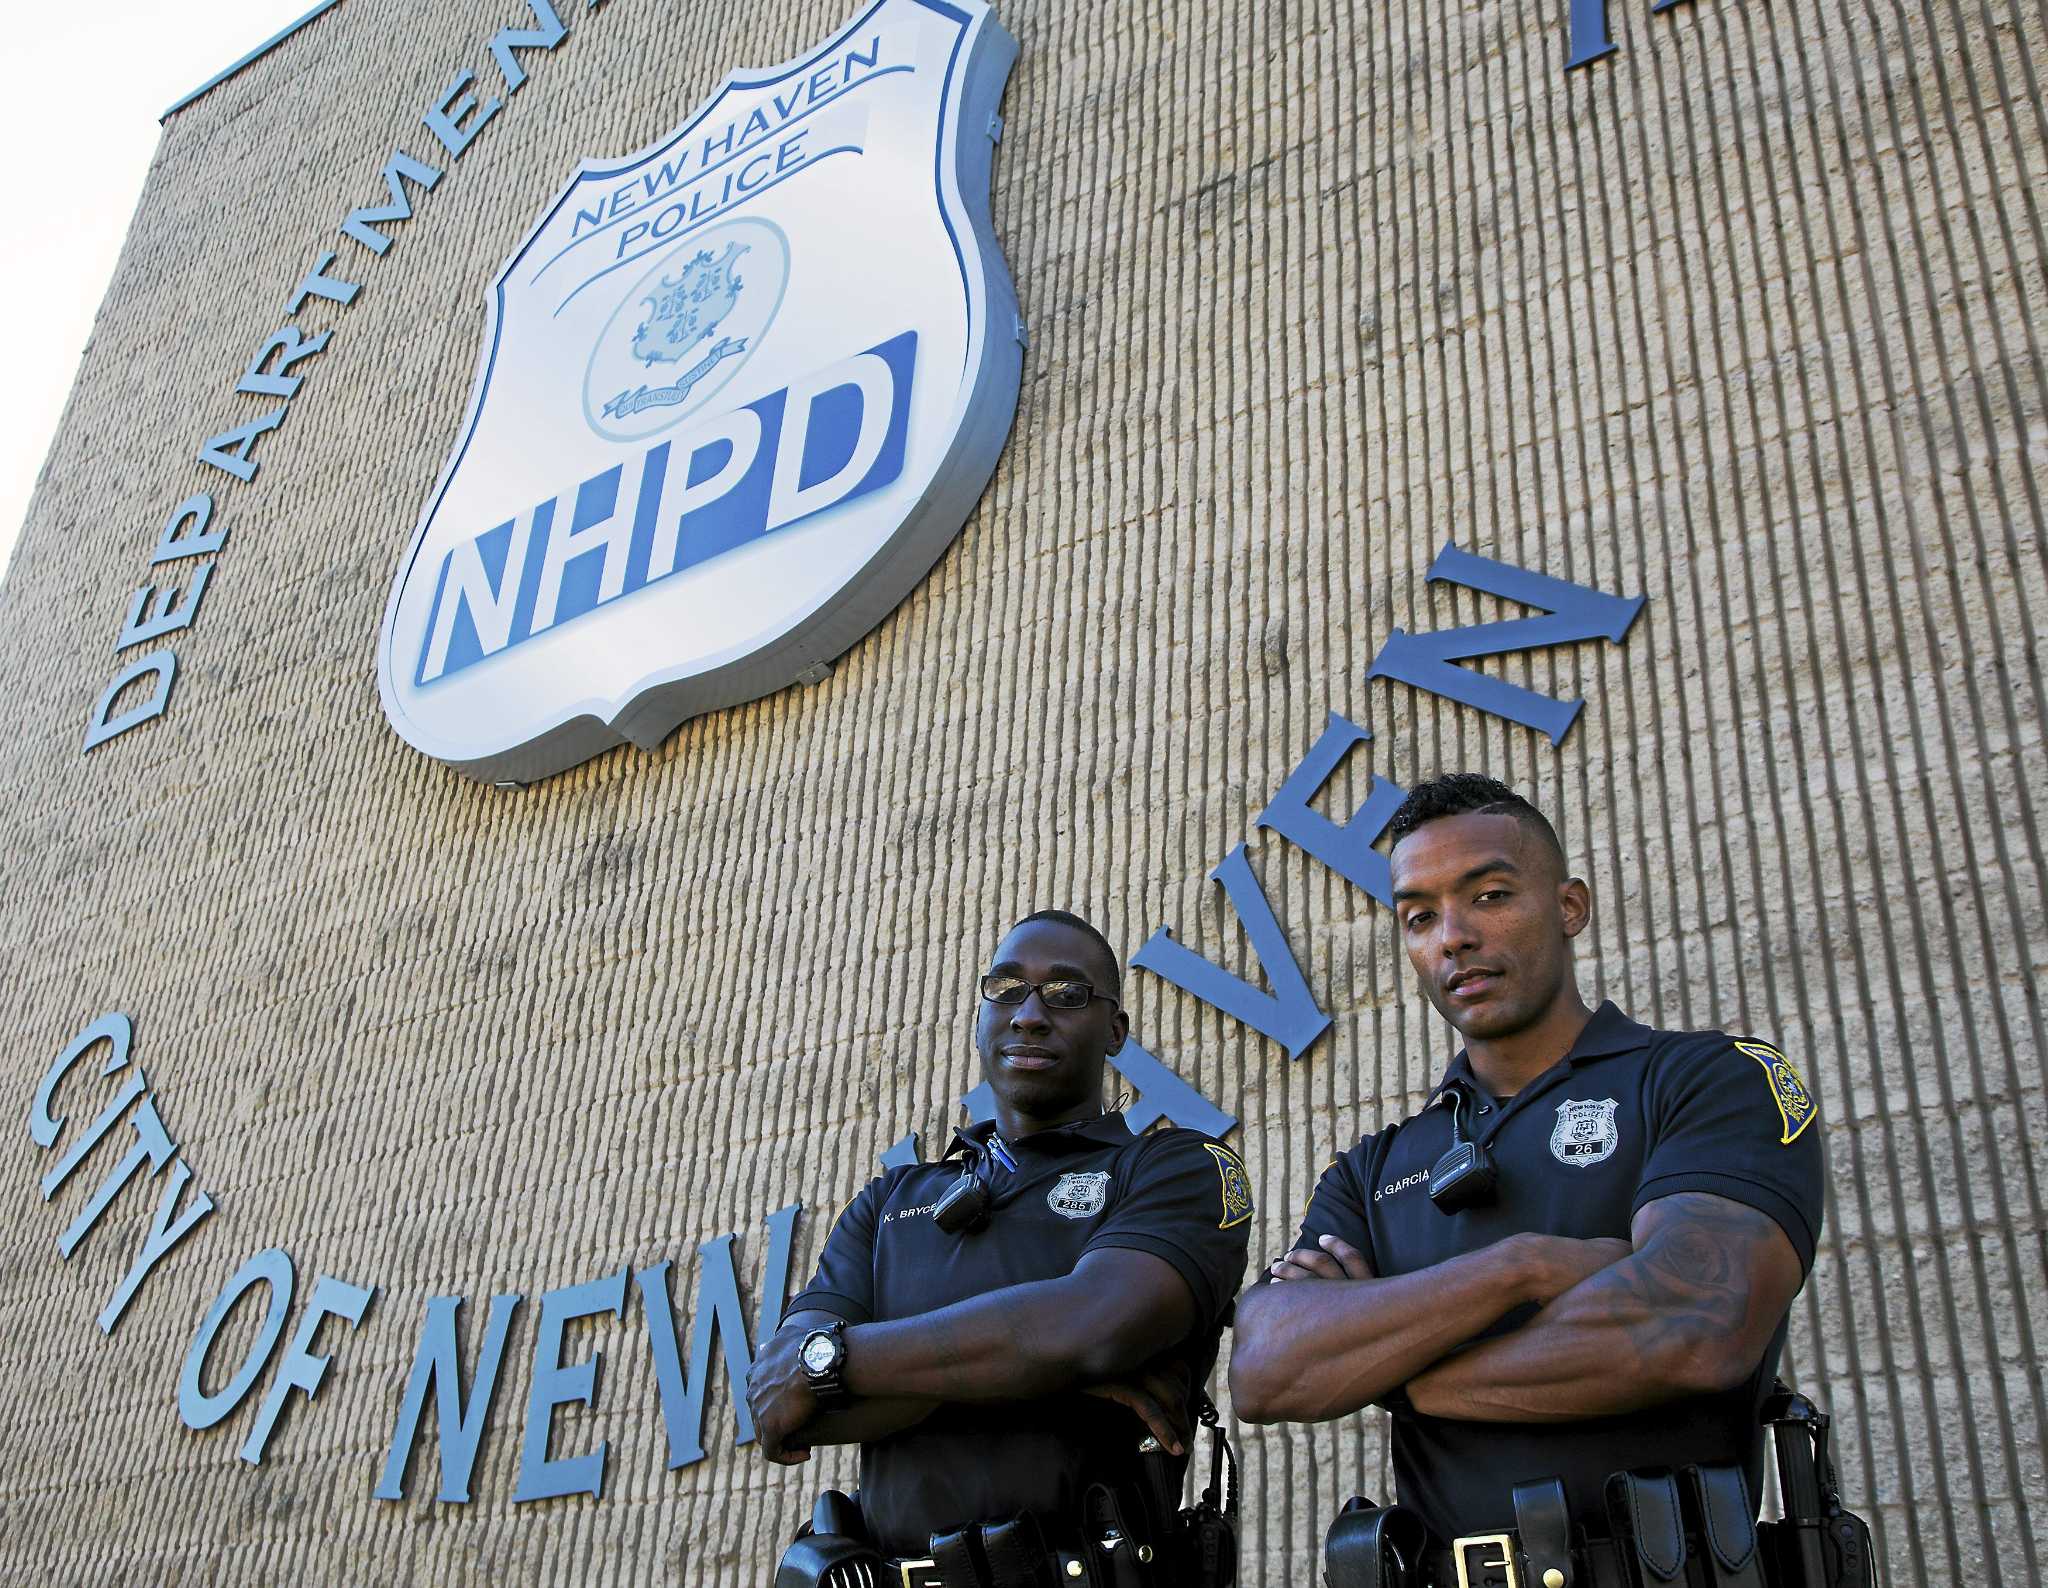 New Haven police officers put in time to get guns off street